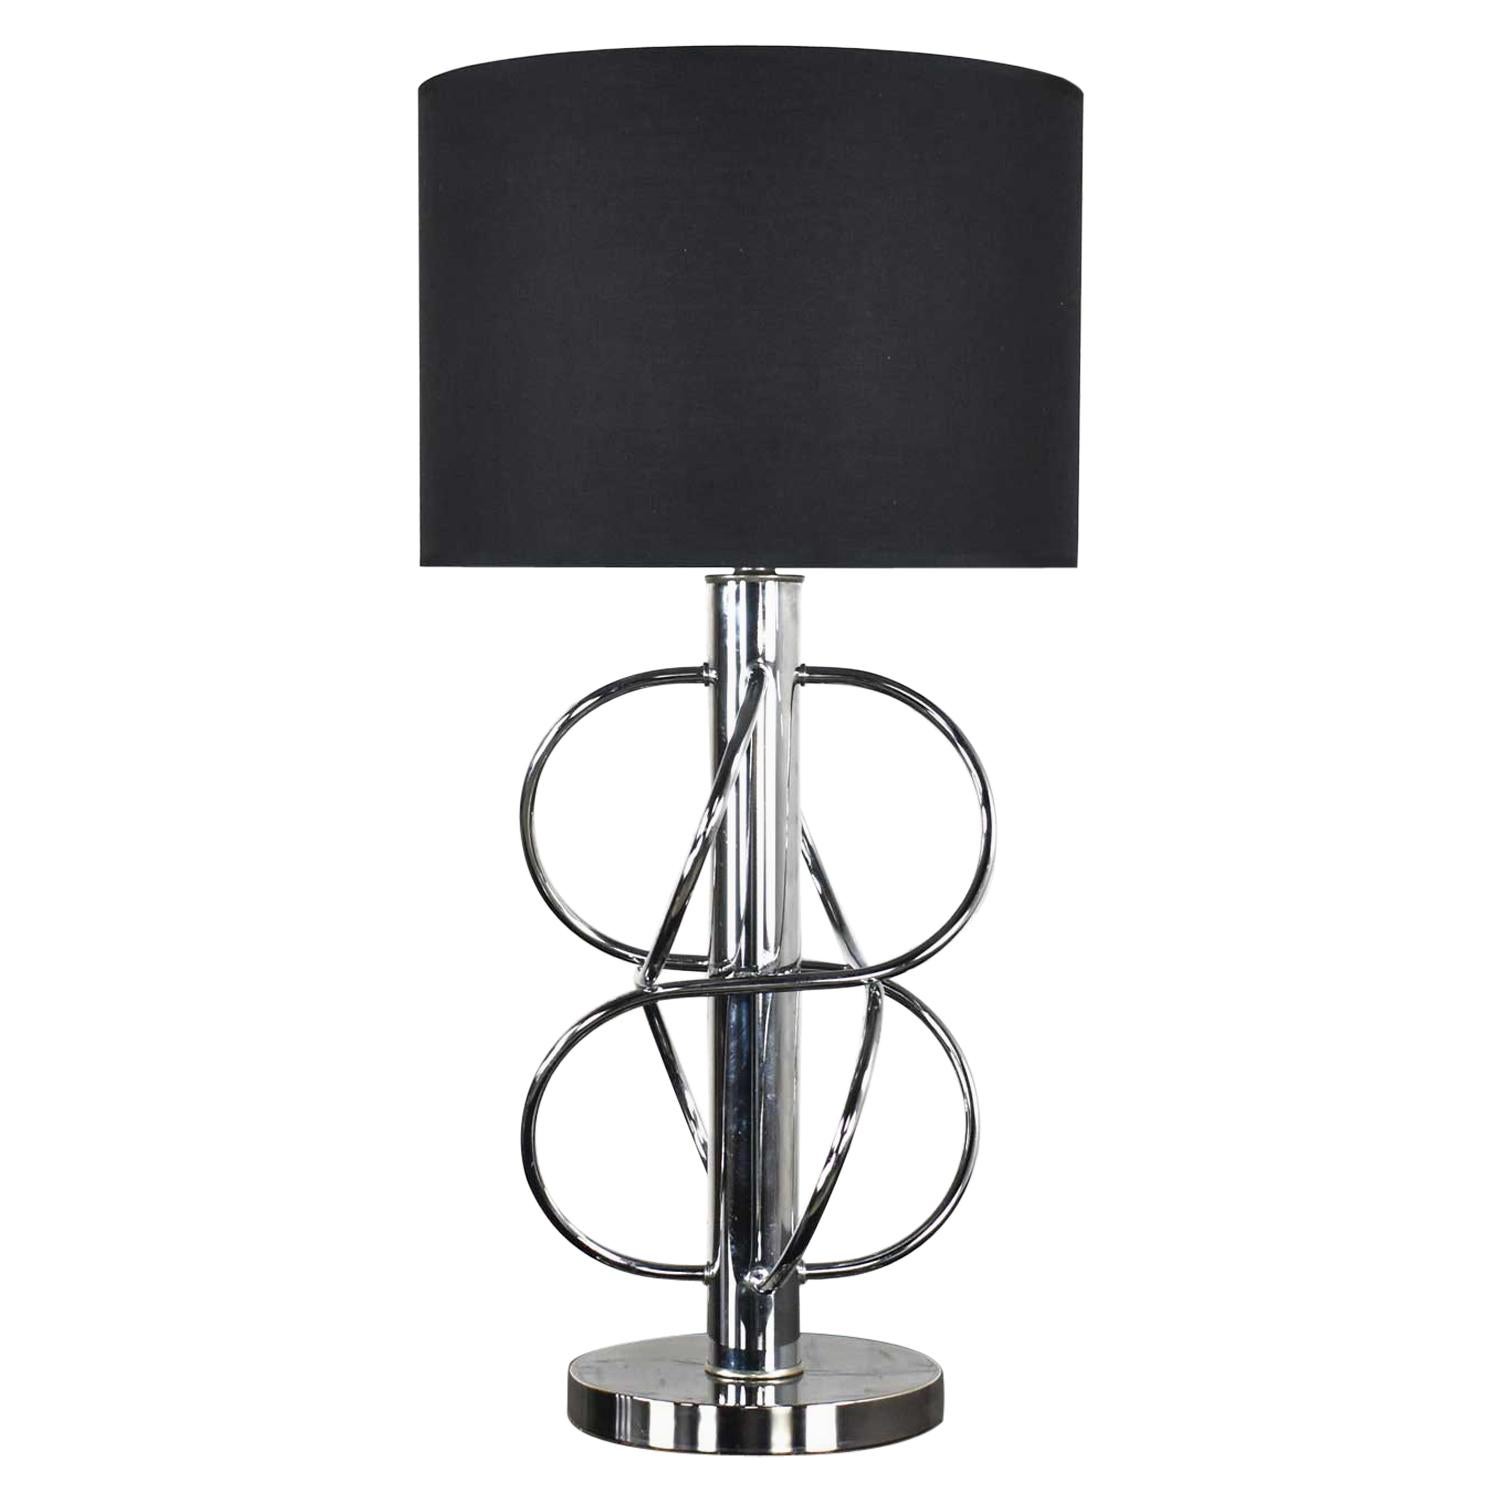 Vintage Mid-Century Modern Polished Chrome Table Lamp New Black Drum Shade For Sale